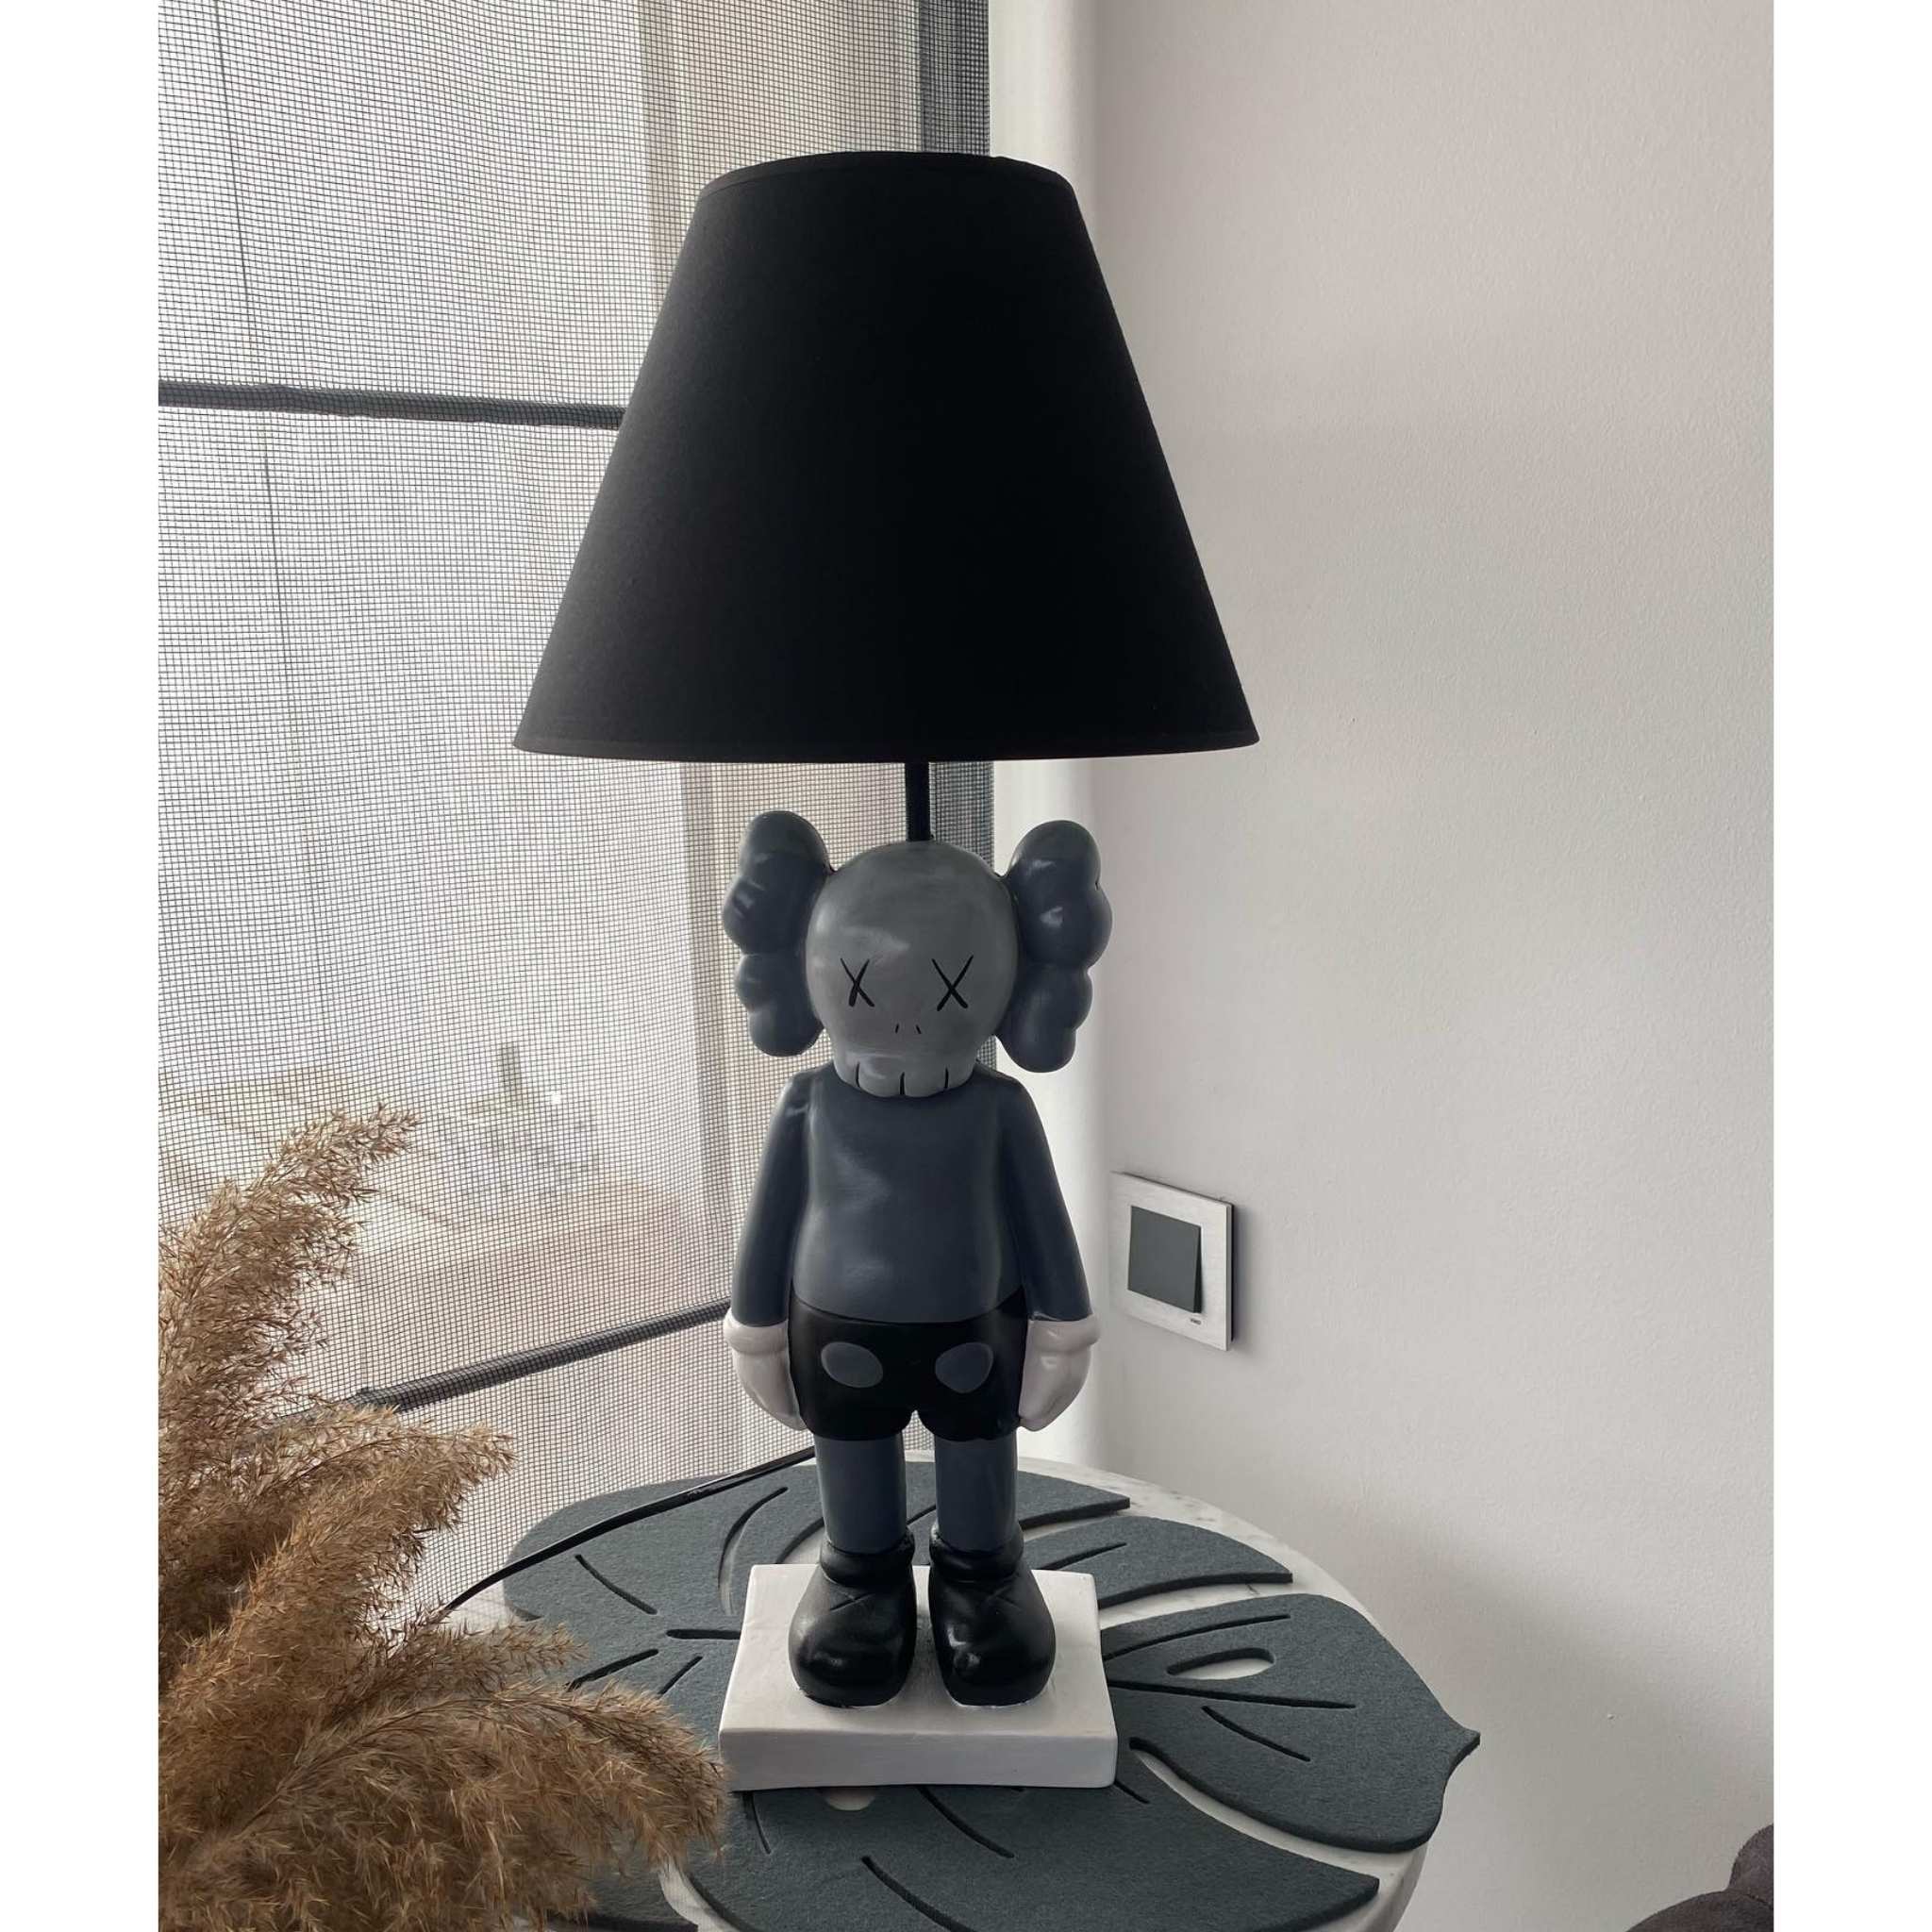 Illuminated Grey: The KAWS Sculpture with Lampshade